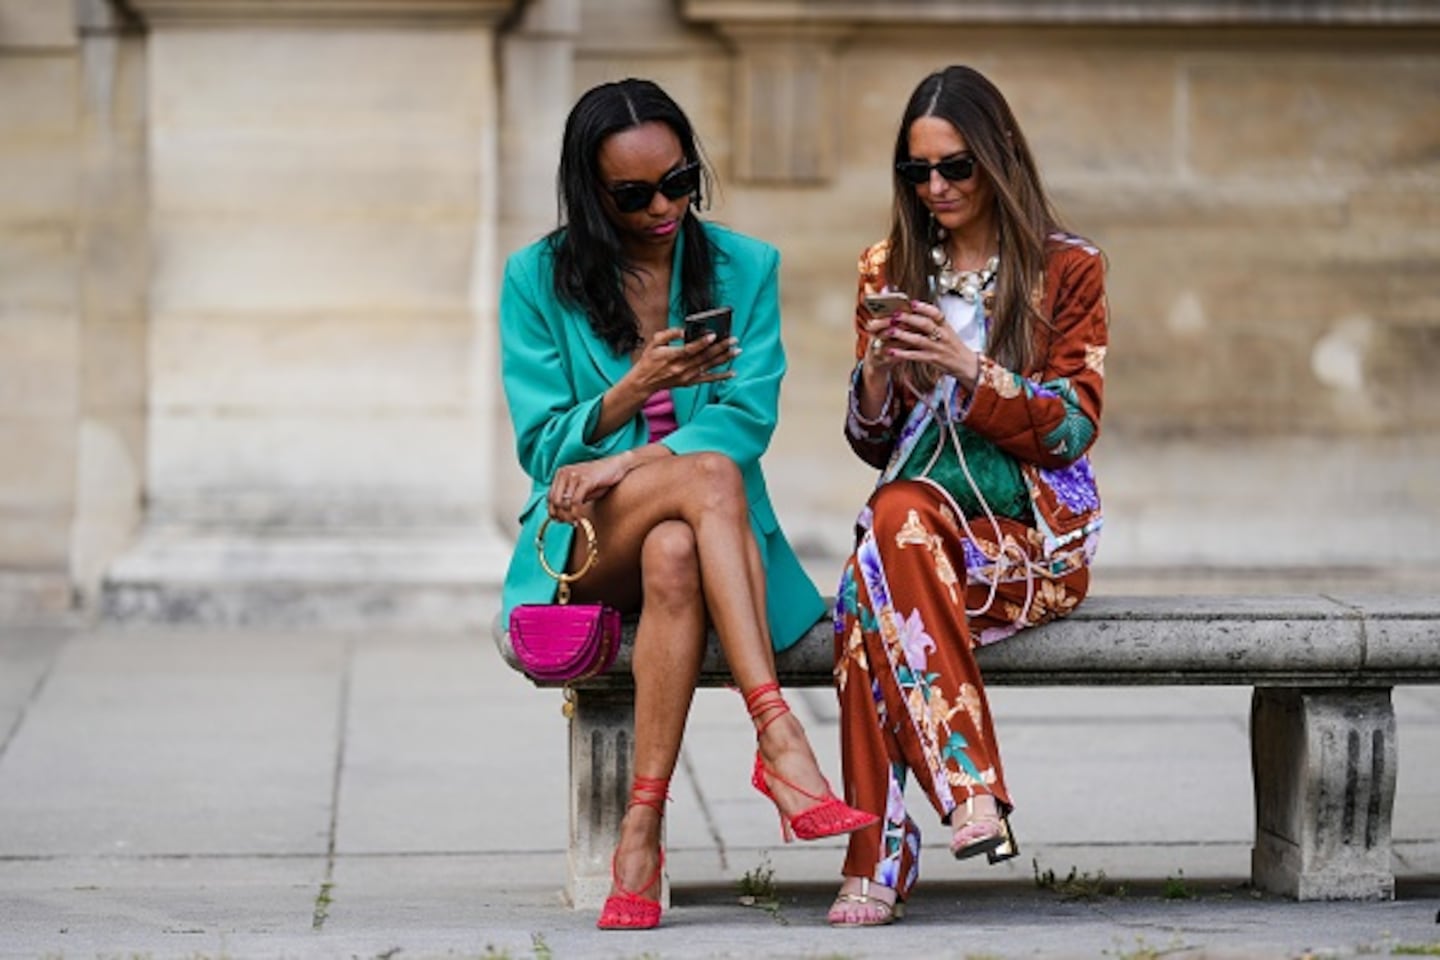 Alba Garavito Torre (R) and Emilie Joseph (L) during a street style fashion photo session in Paris.